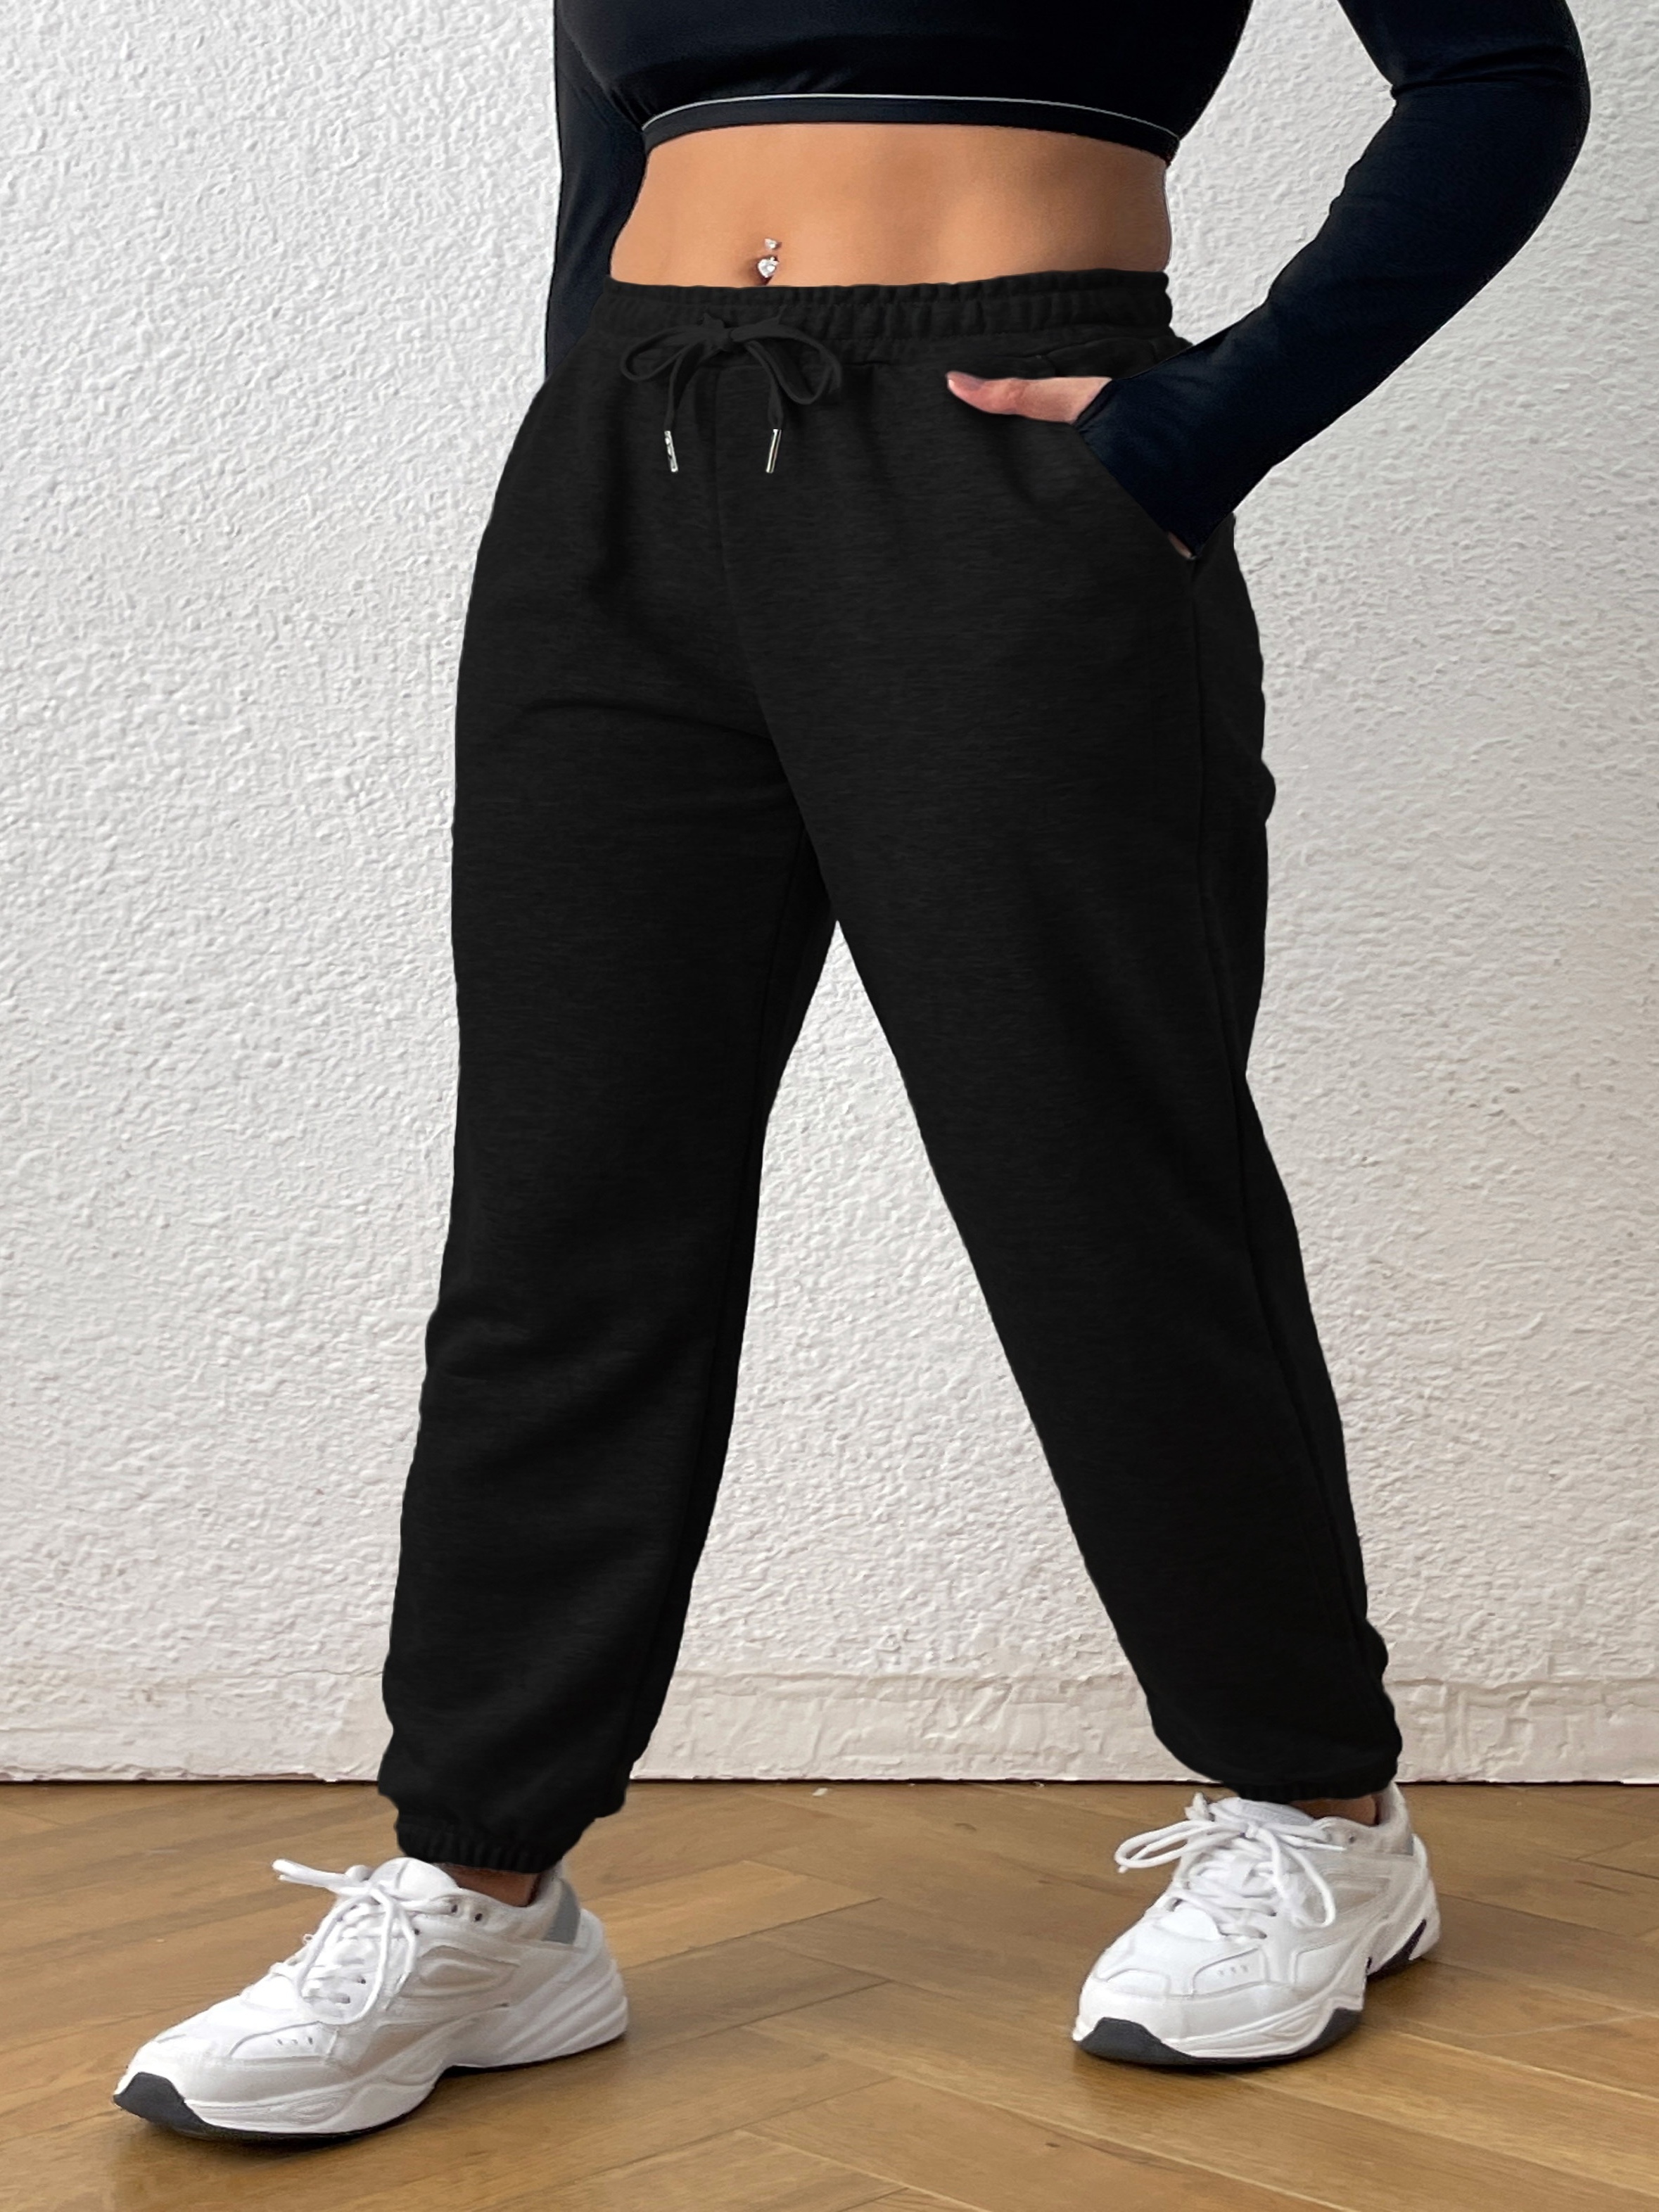  Black Sweatpants Womens Baggy Sweatpants for Womens Warm Winter  Pants Cuffed Athletic Oversized Lounge Bottoms Sweatpant for Women Pants  Womens Casual : Sports & Outdoors